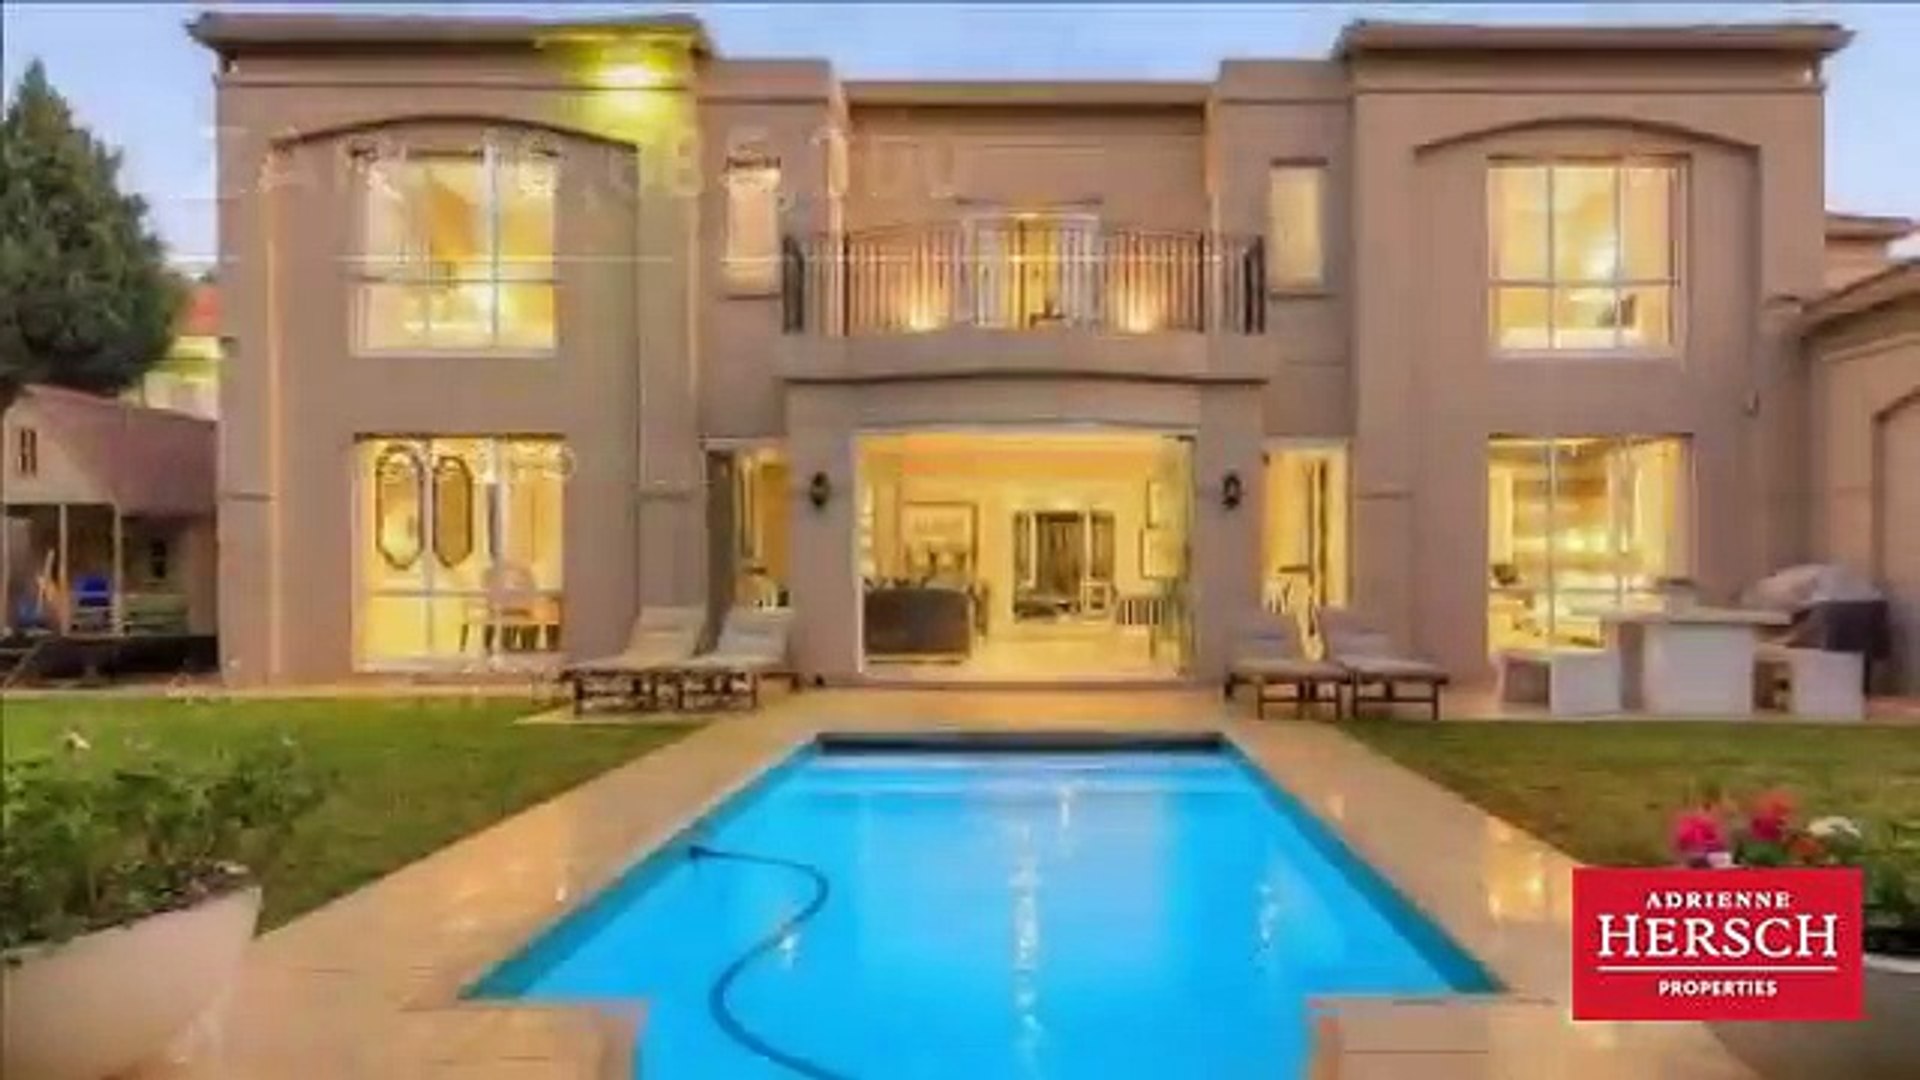 ⁣4 Bedroom Townhouse For Sale in Houghton Estate, Johannesburg, South Africa for ZAR 10,685,000...